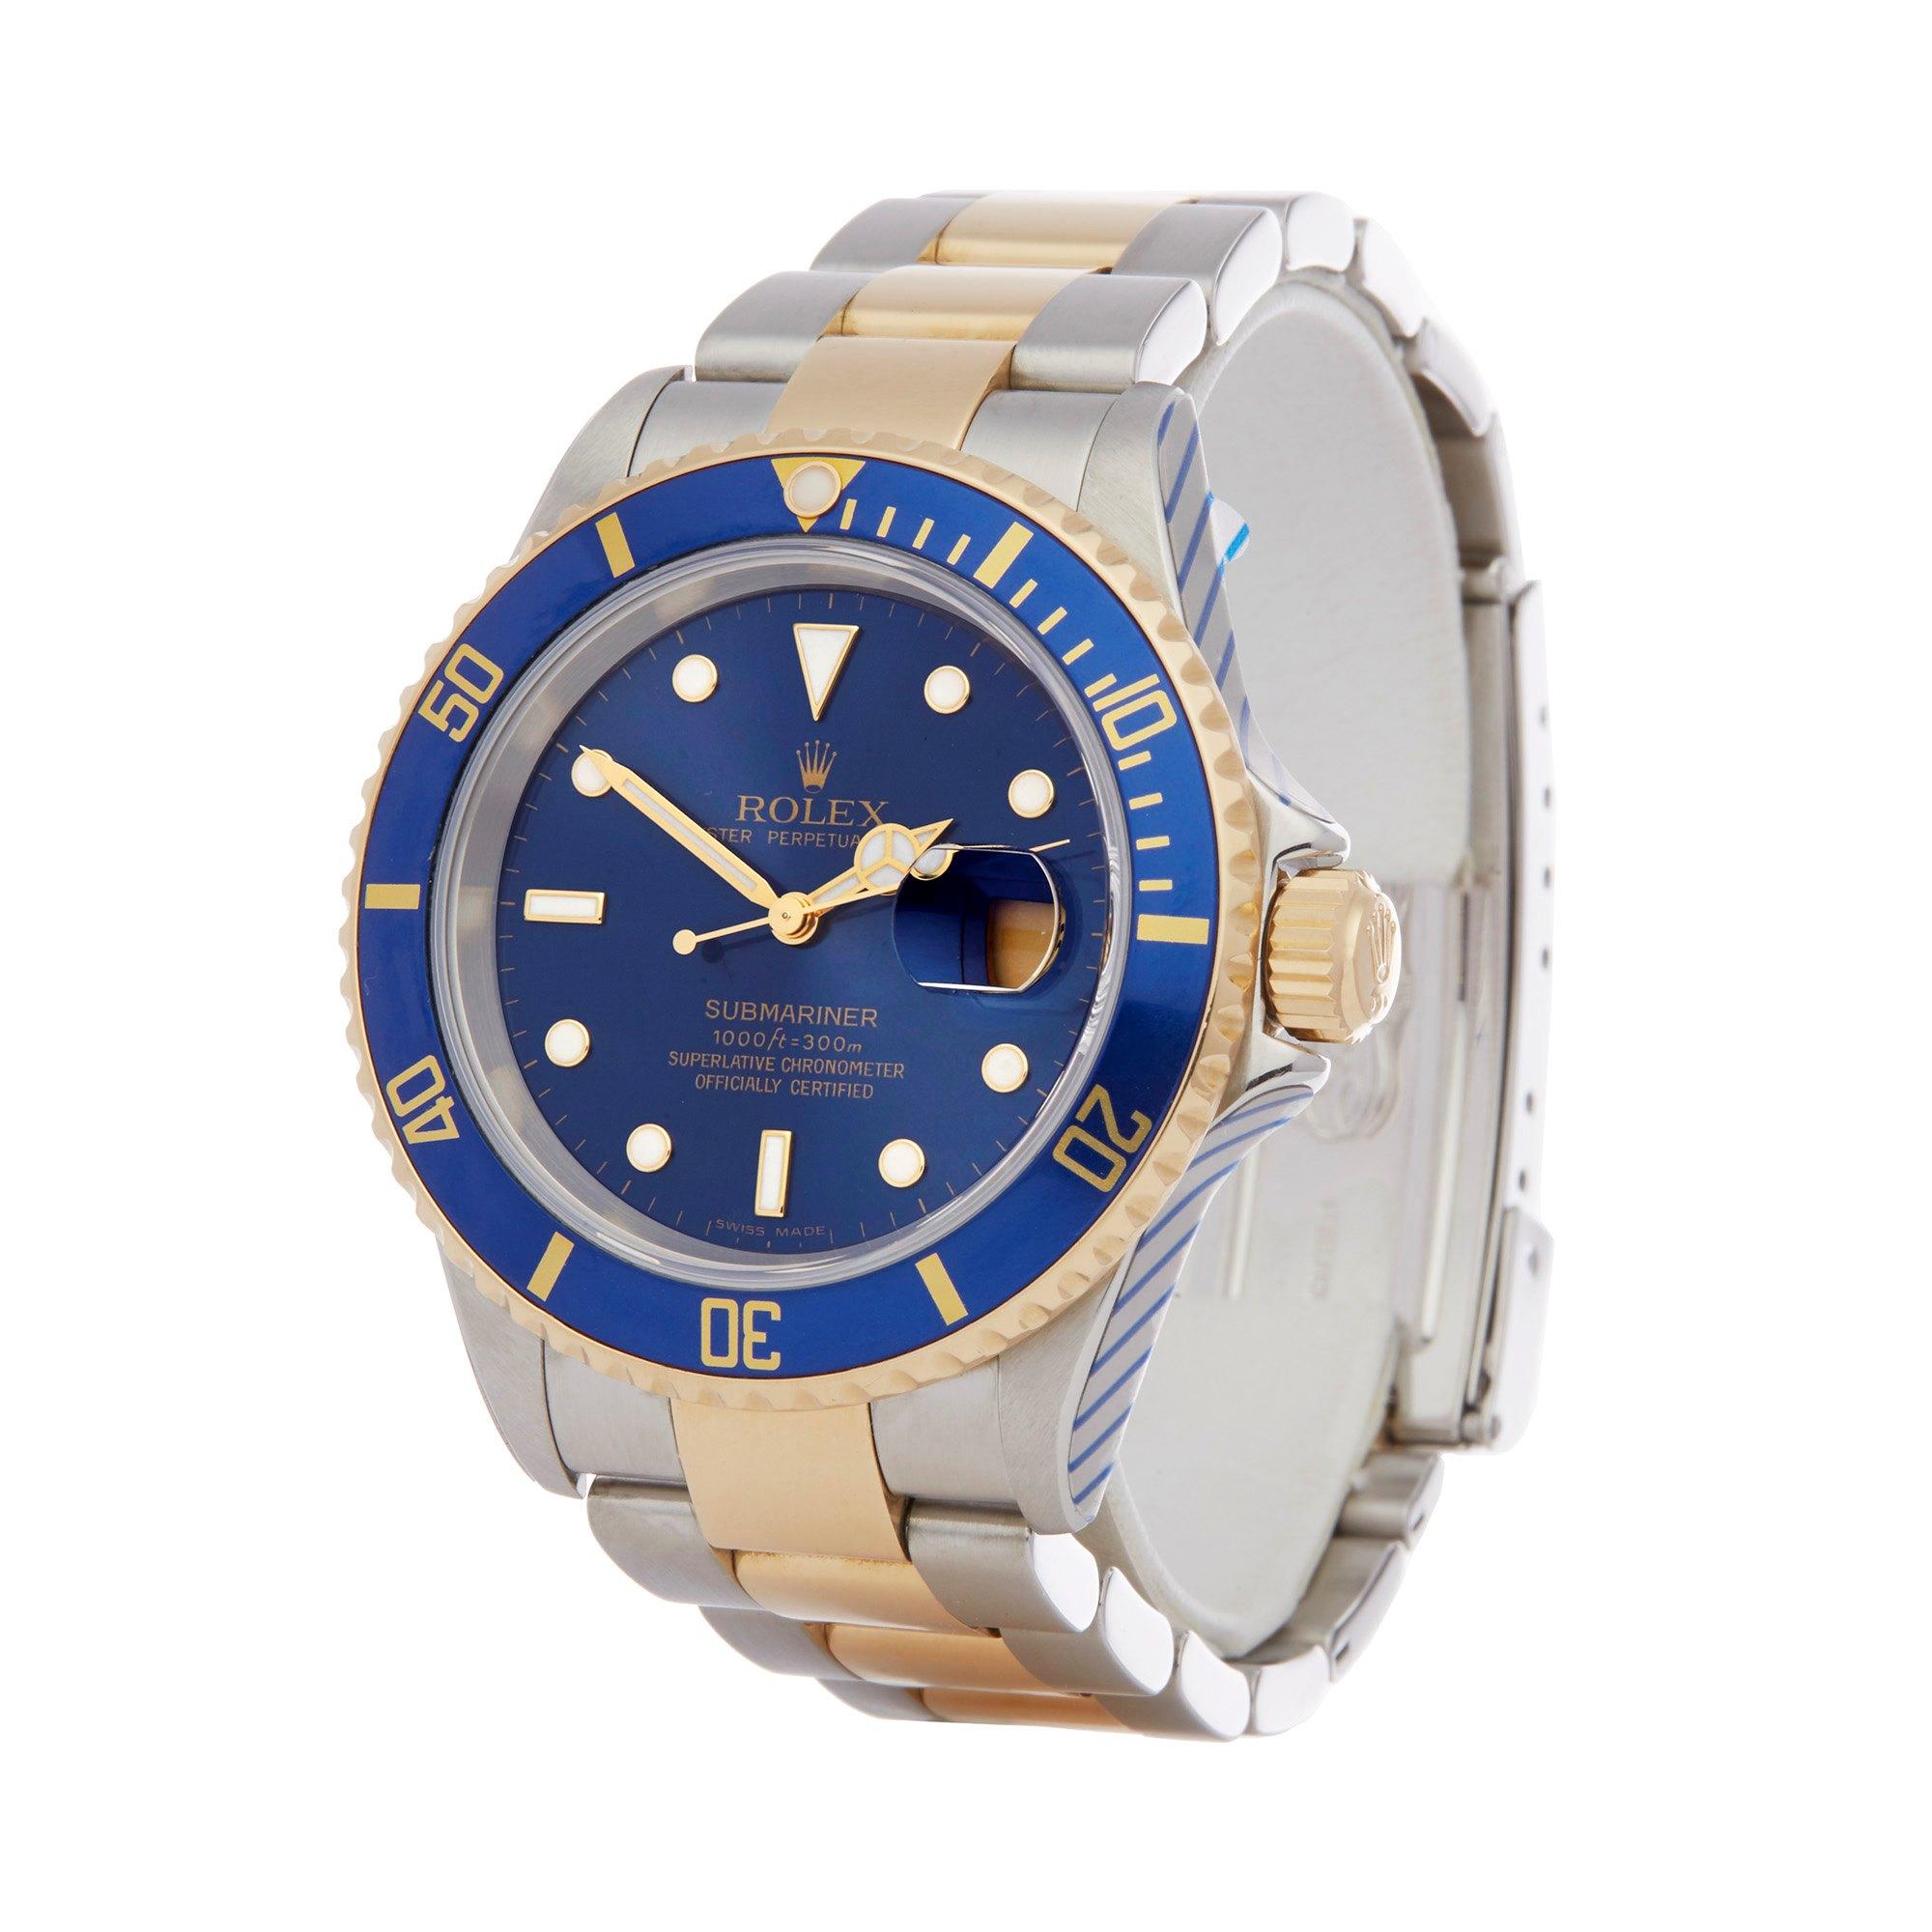 Xupes Reference: W007210
Manufacturer: Rolex
Model: Submariner
Model Variant: Date
Model Number: 16613
Age: 08-10-2006
Gender: Men
Complete With: Rolex Box, Manuals, Guarantee, Swing Tags & Rolex Service Papers Dated 15th November 2016
Dial: Blue